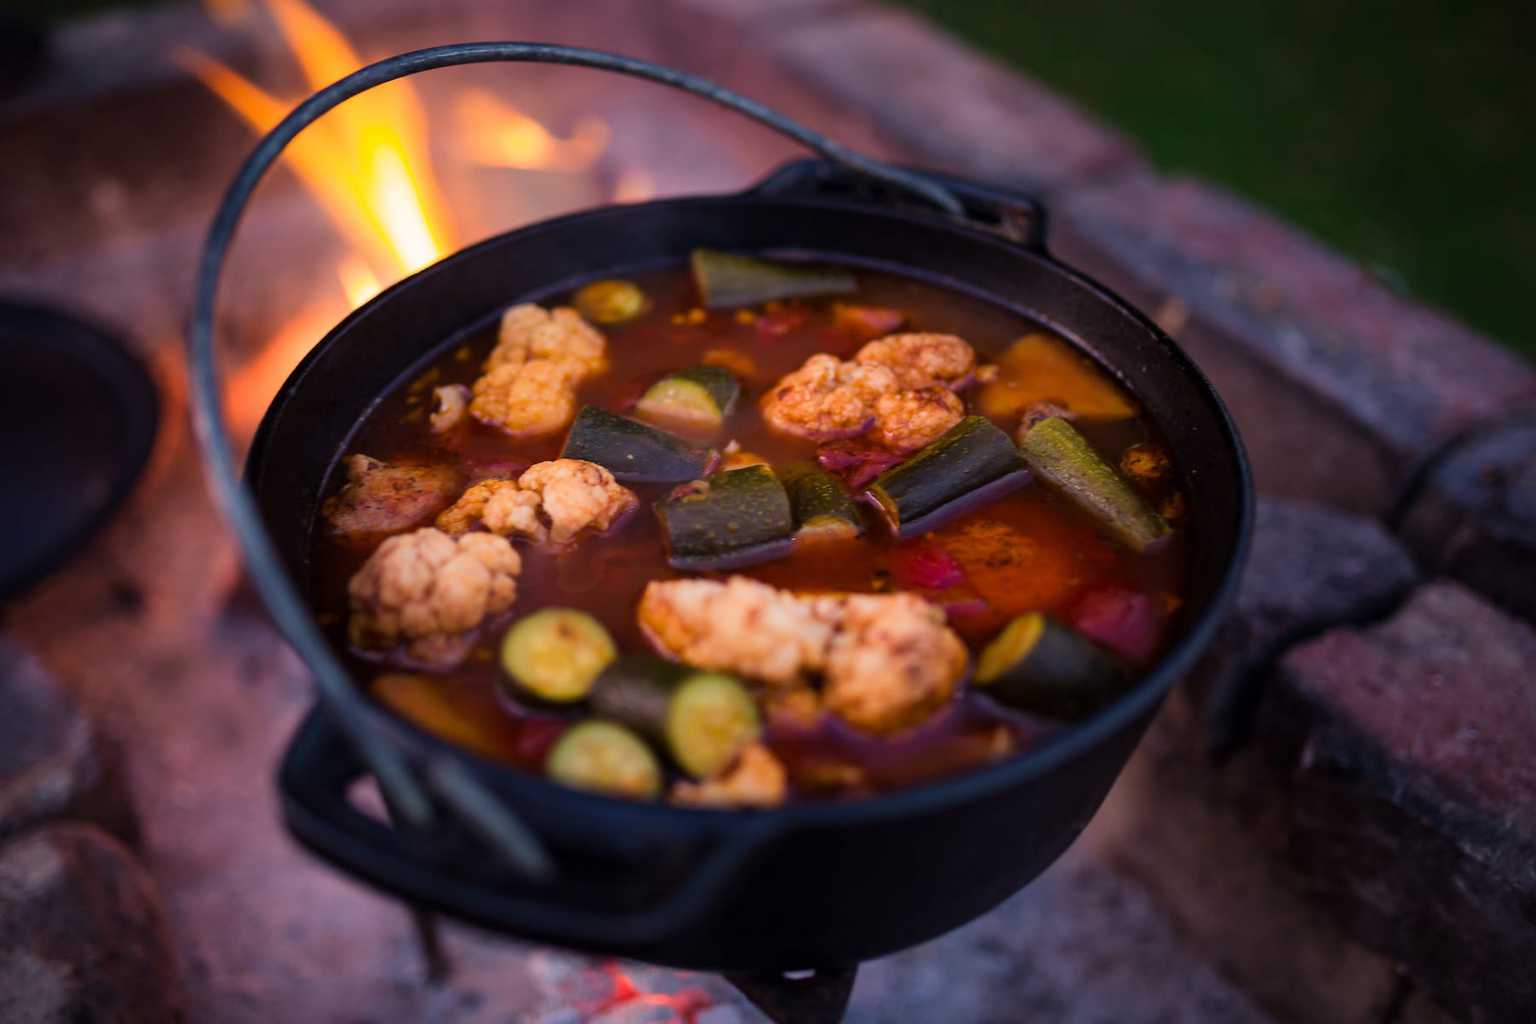 Potjie stew for dinner